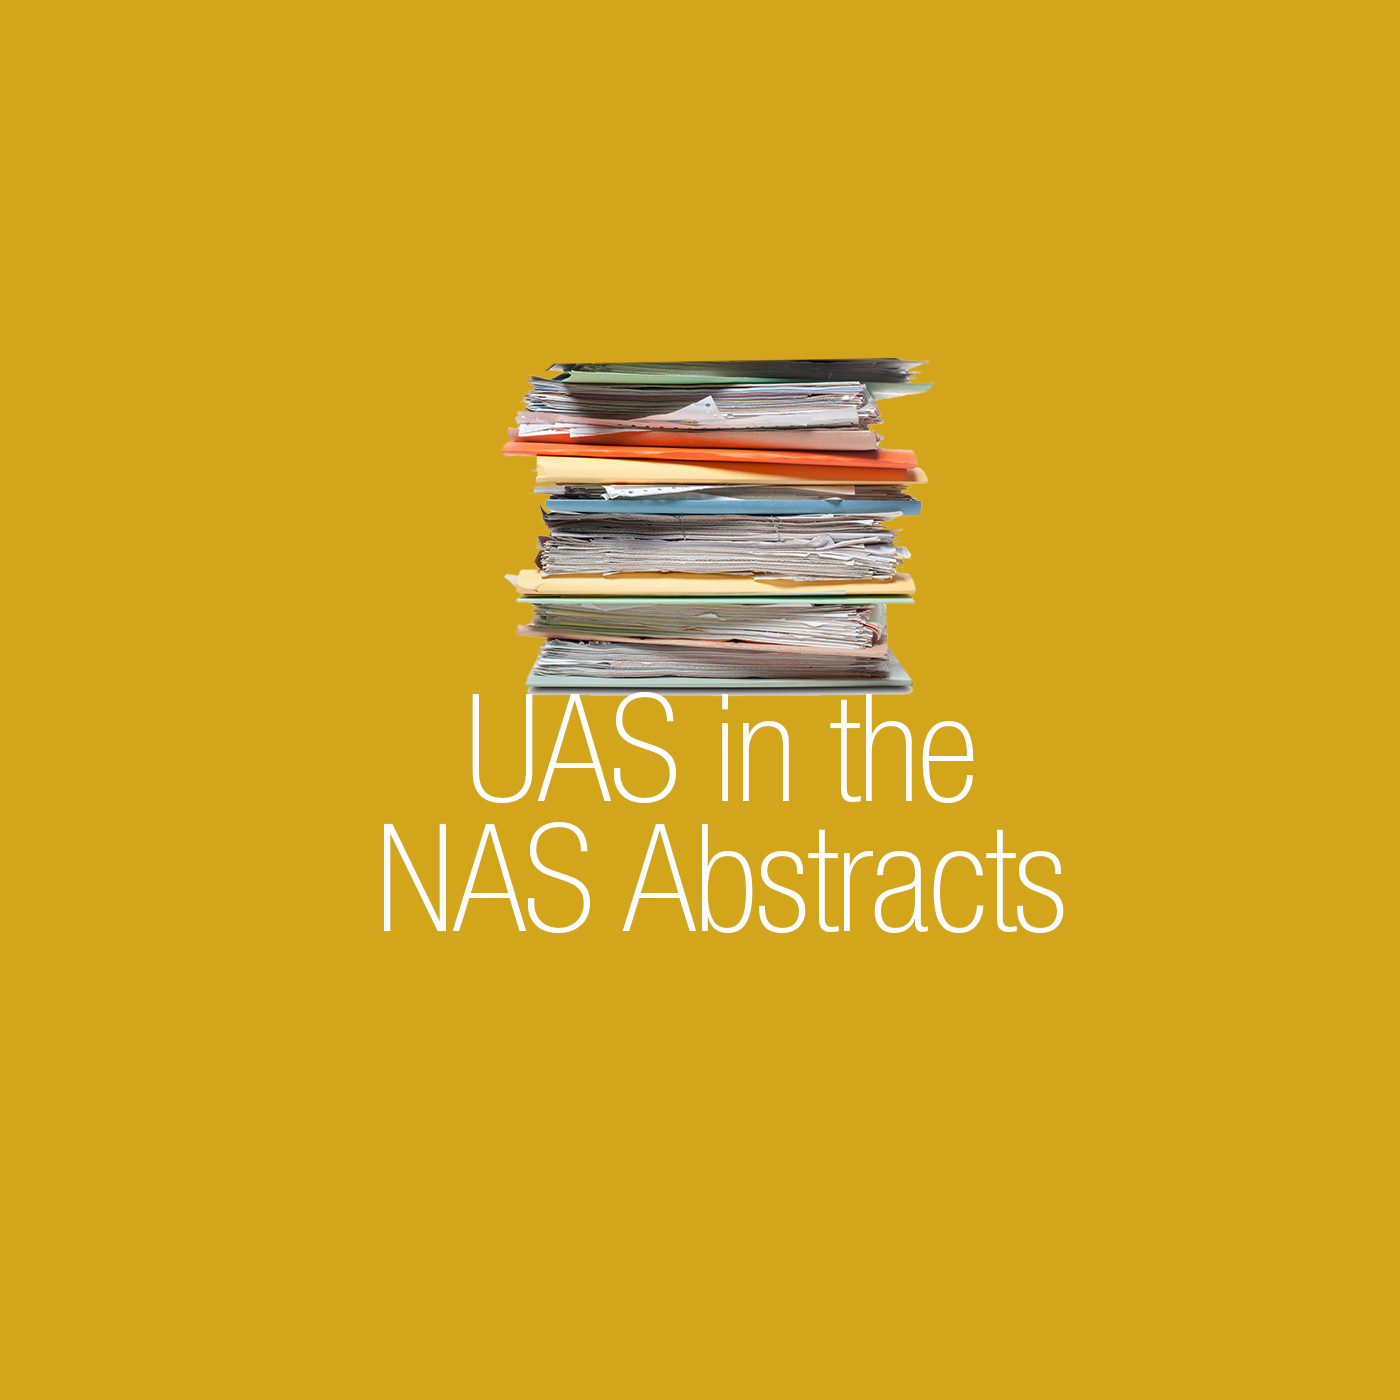 UAS in the NAS Abstracts